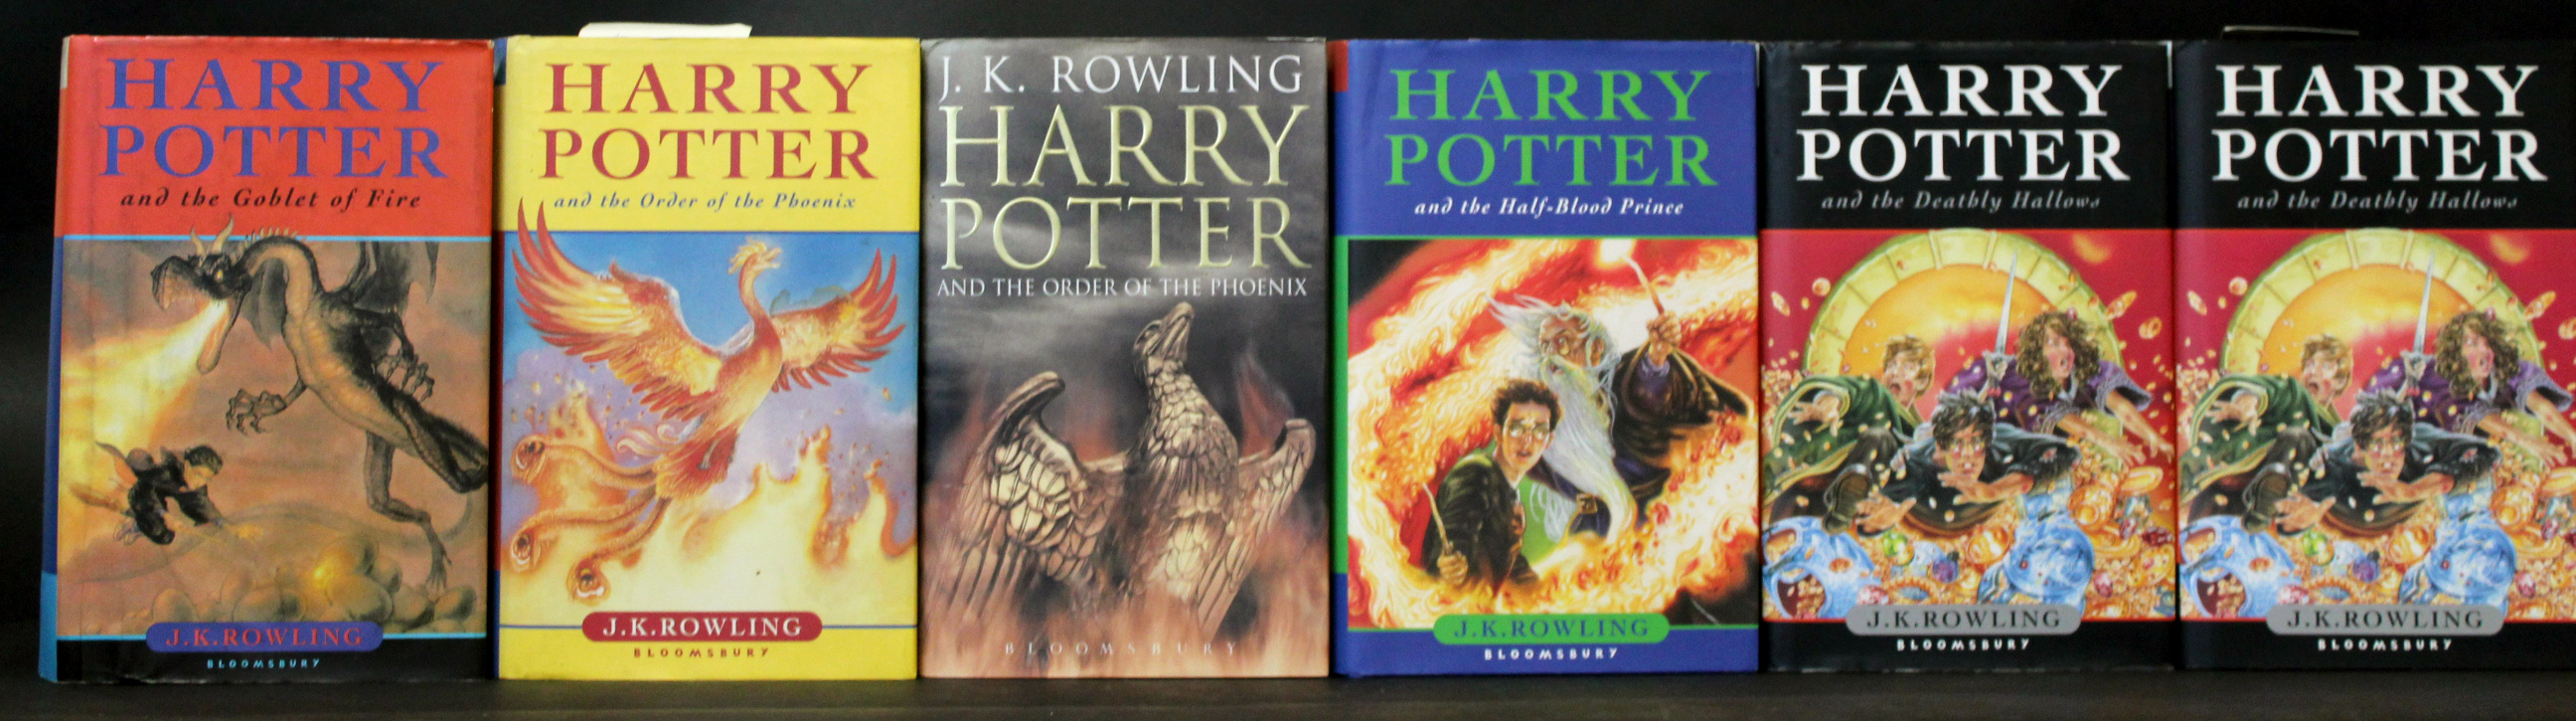 J K ROWLING: 5 titles: HARRY POTTER AND THE GOBLET OF FIRE, Bloomsbury, 2000, 1st edition,